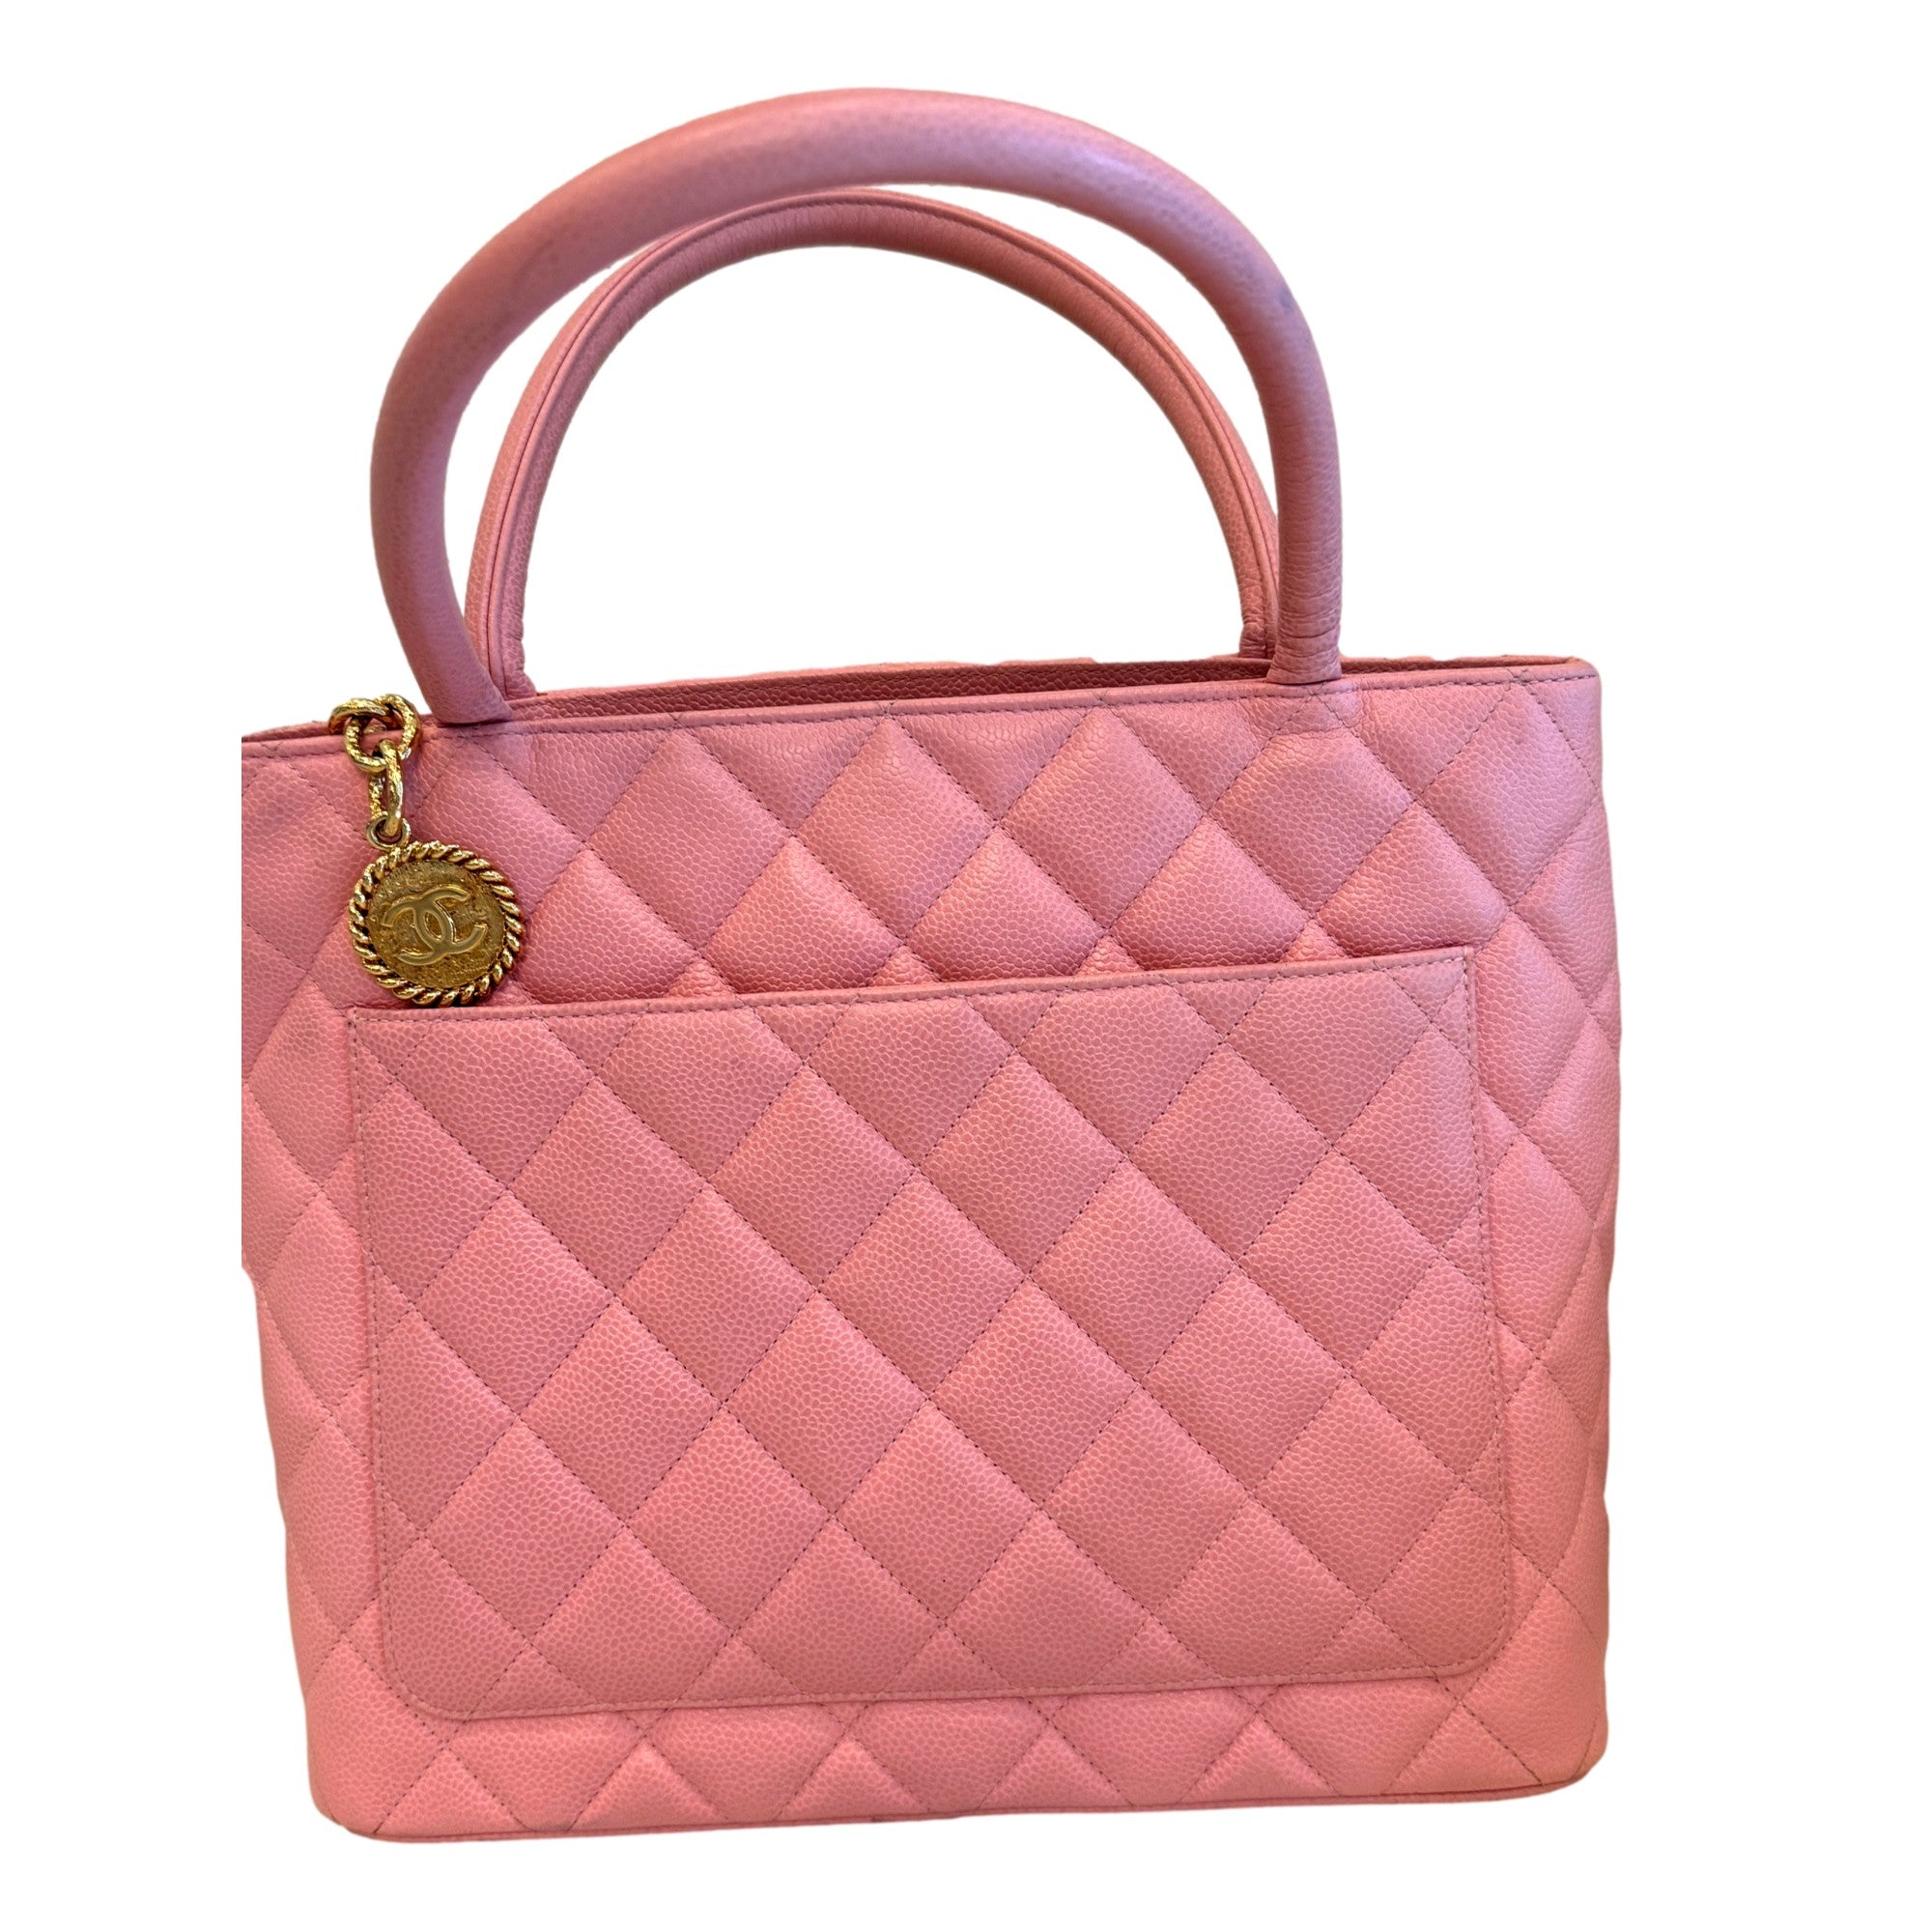 Chanel Caviar Quilted Leather Medallion Tote Pink